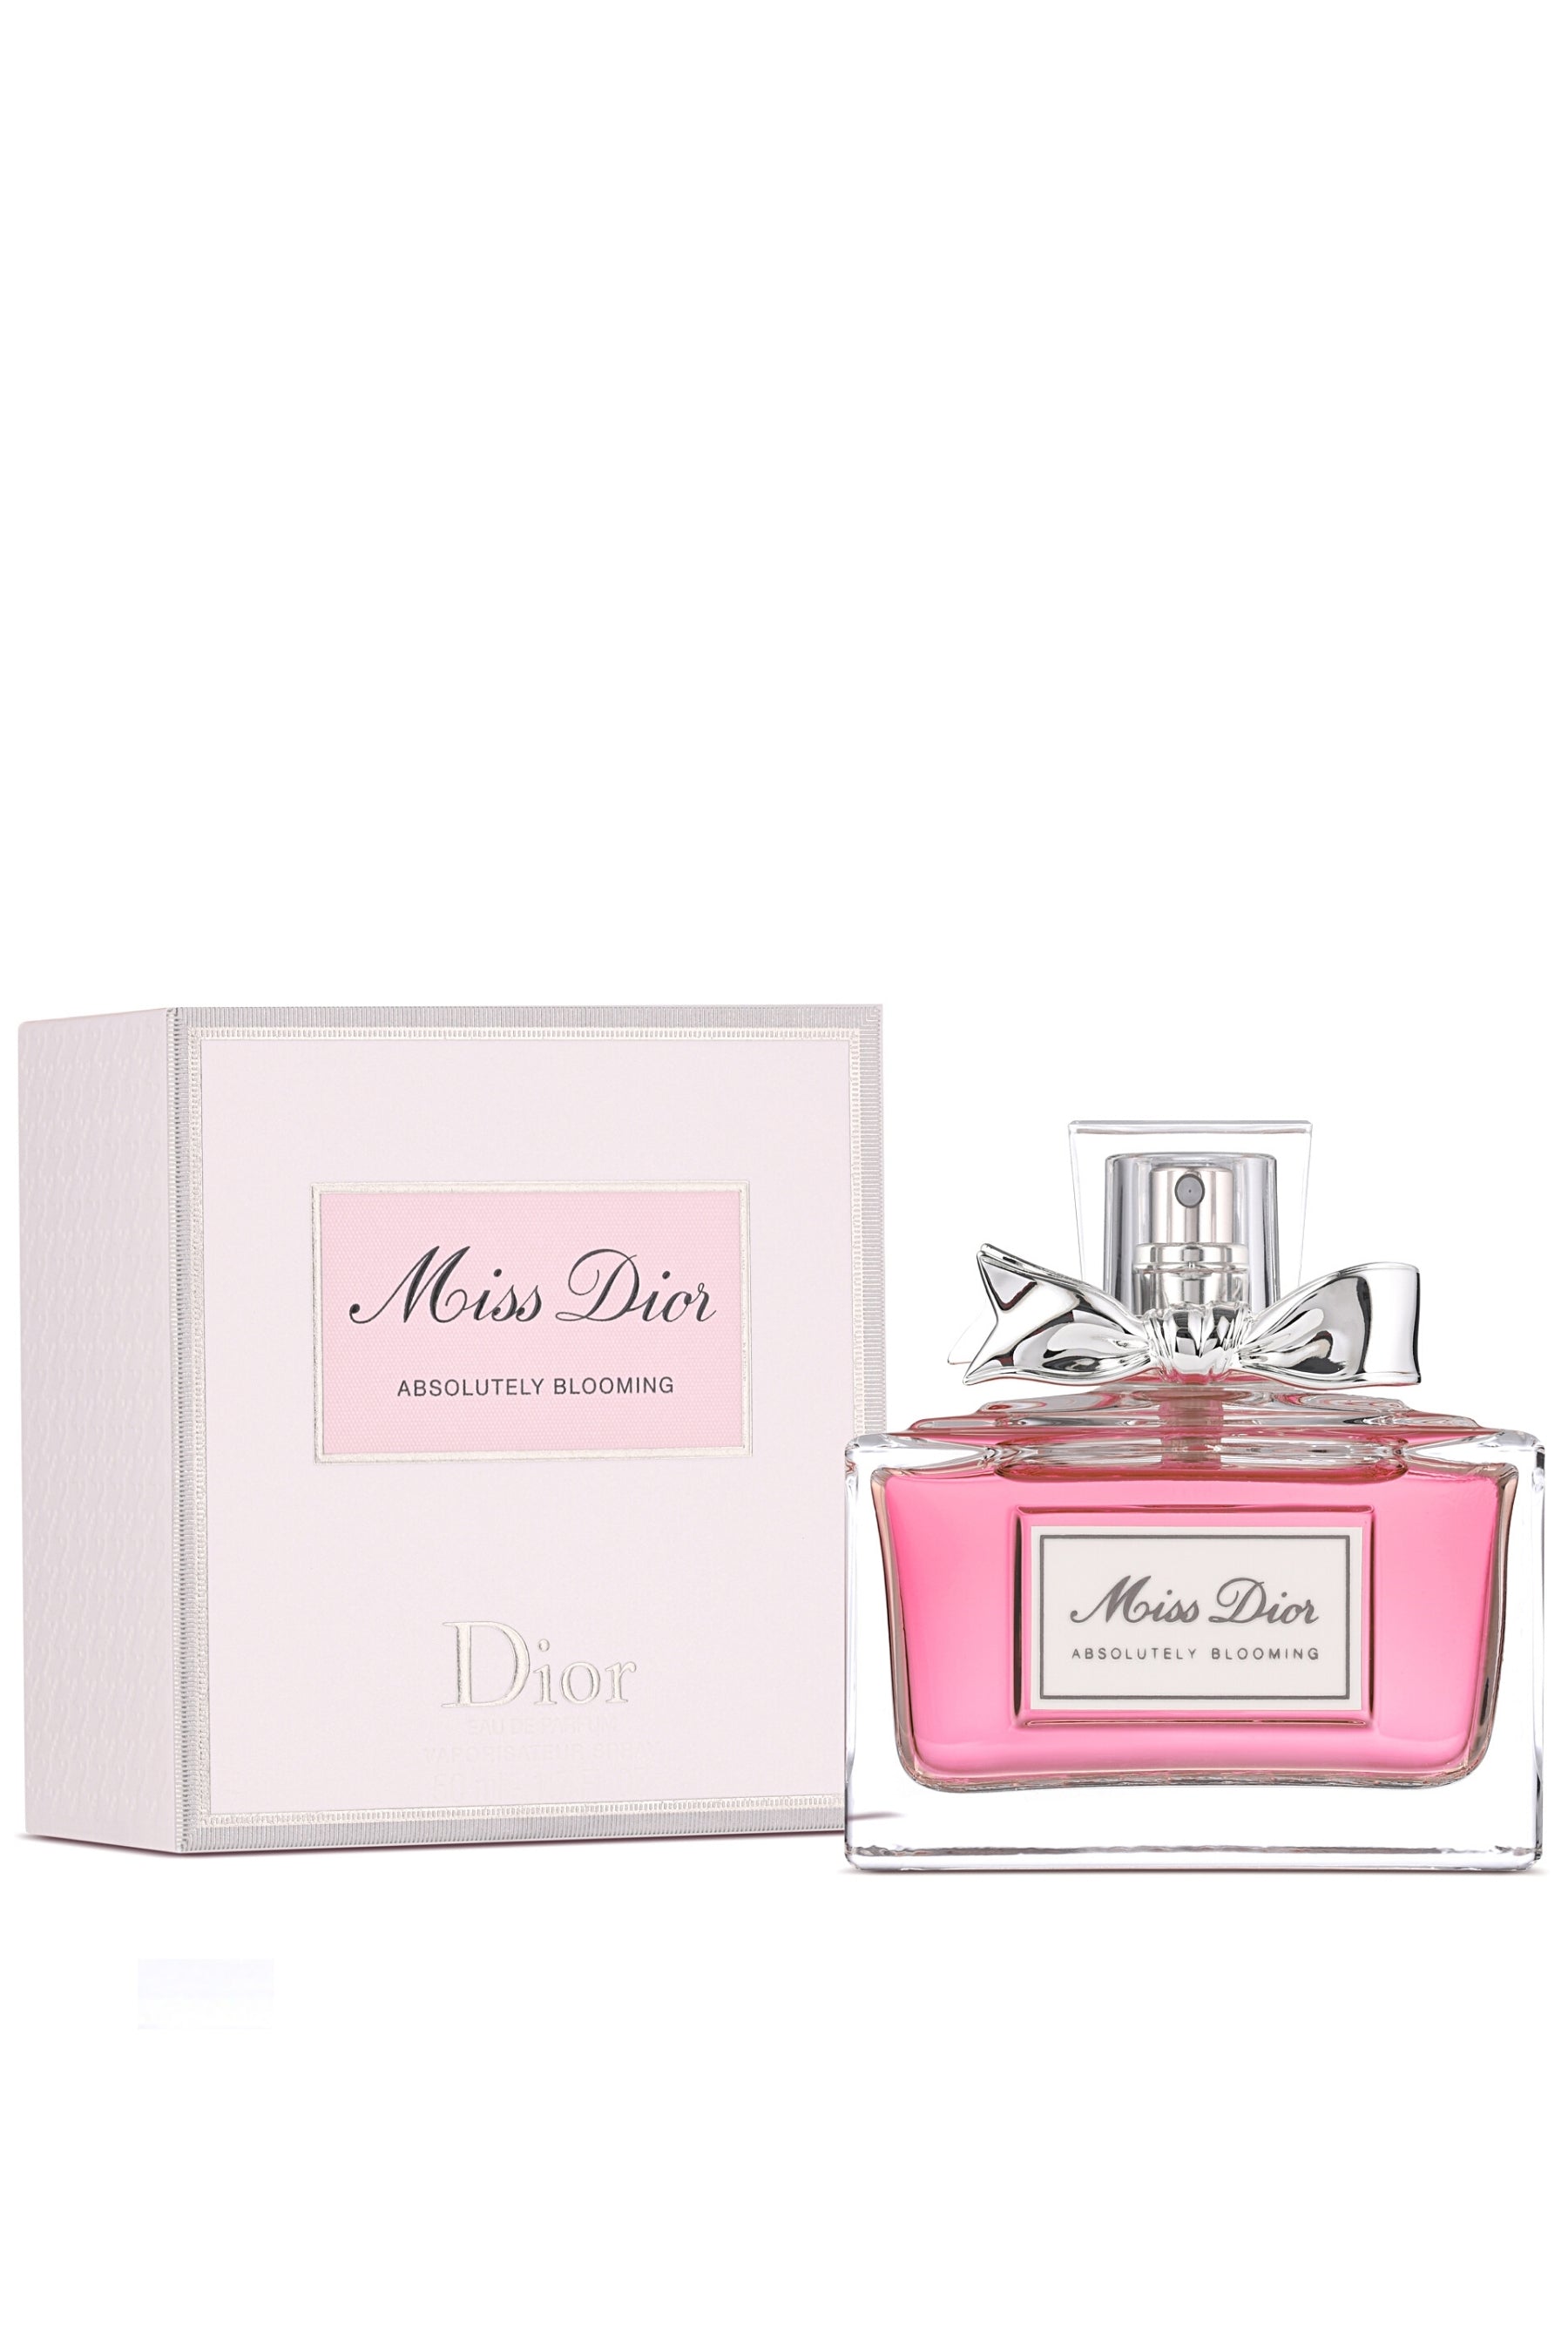 Miss Dior Perfume Review - Best Perfumes for Spring